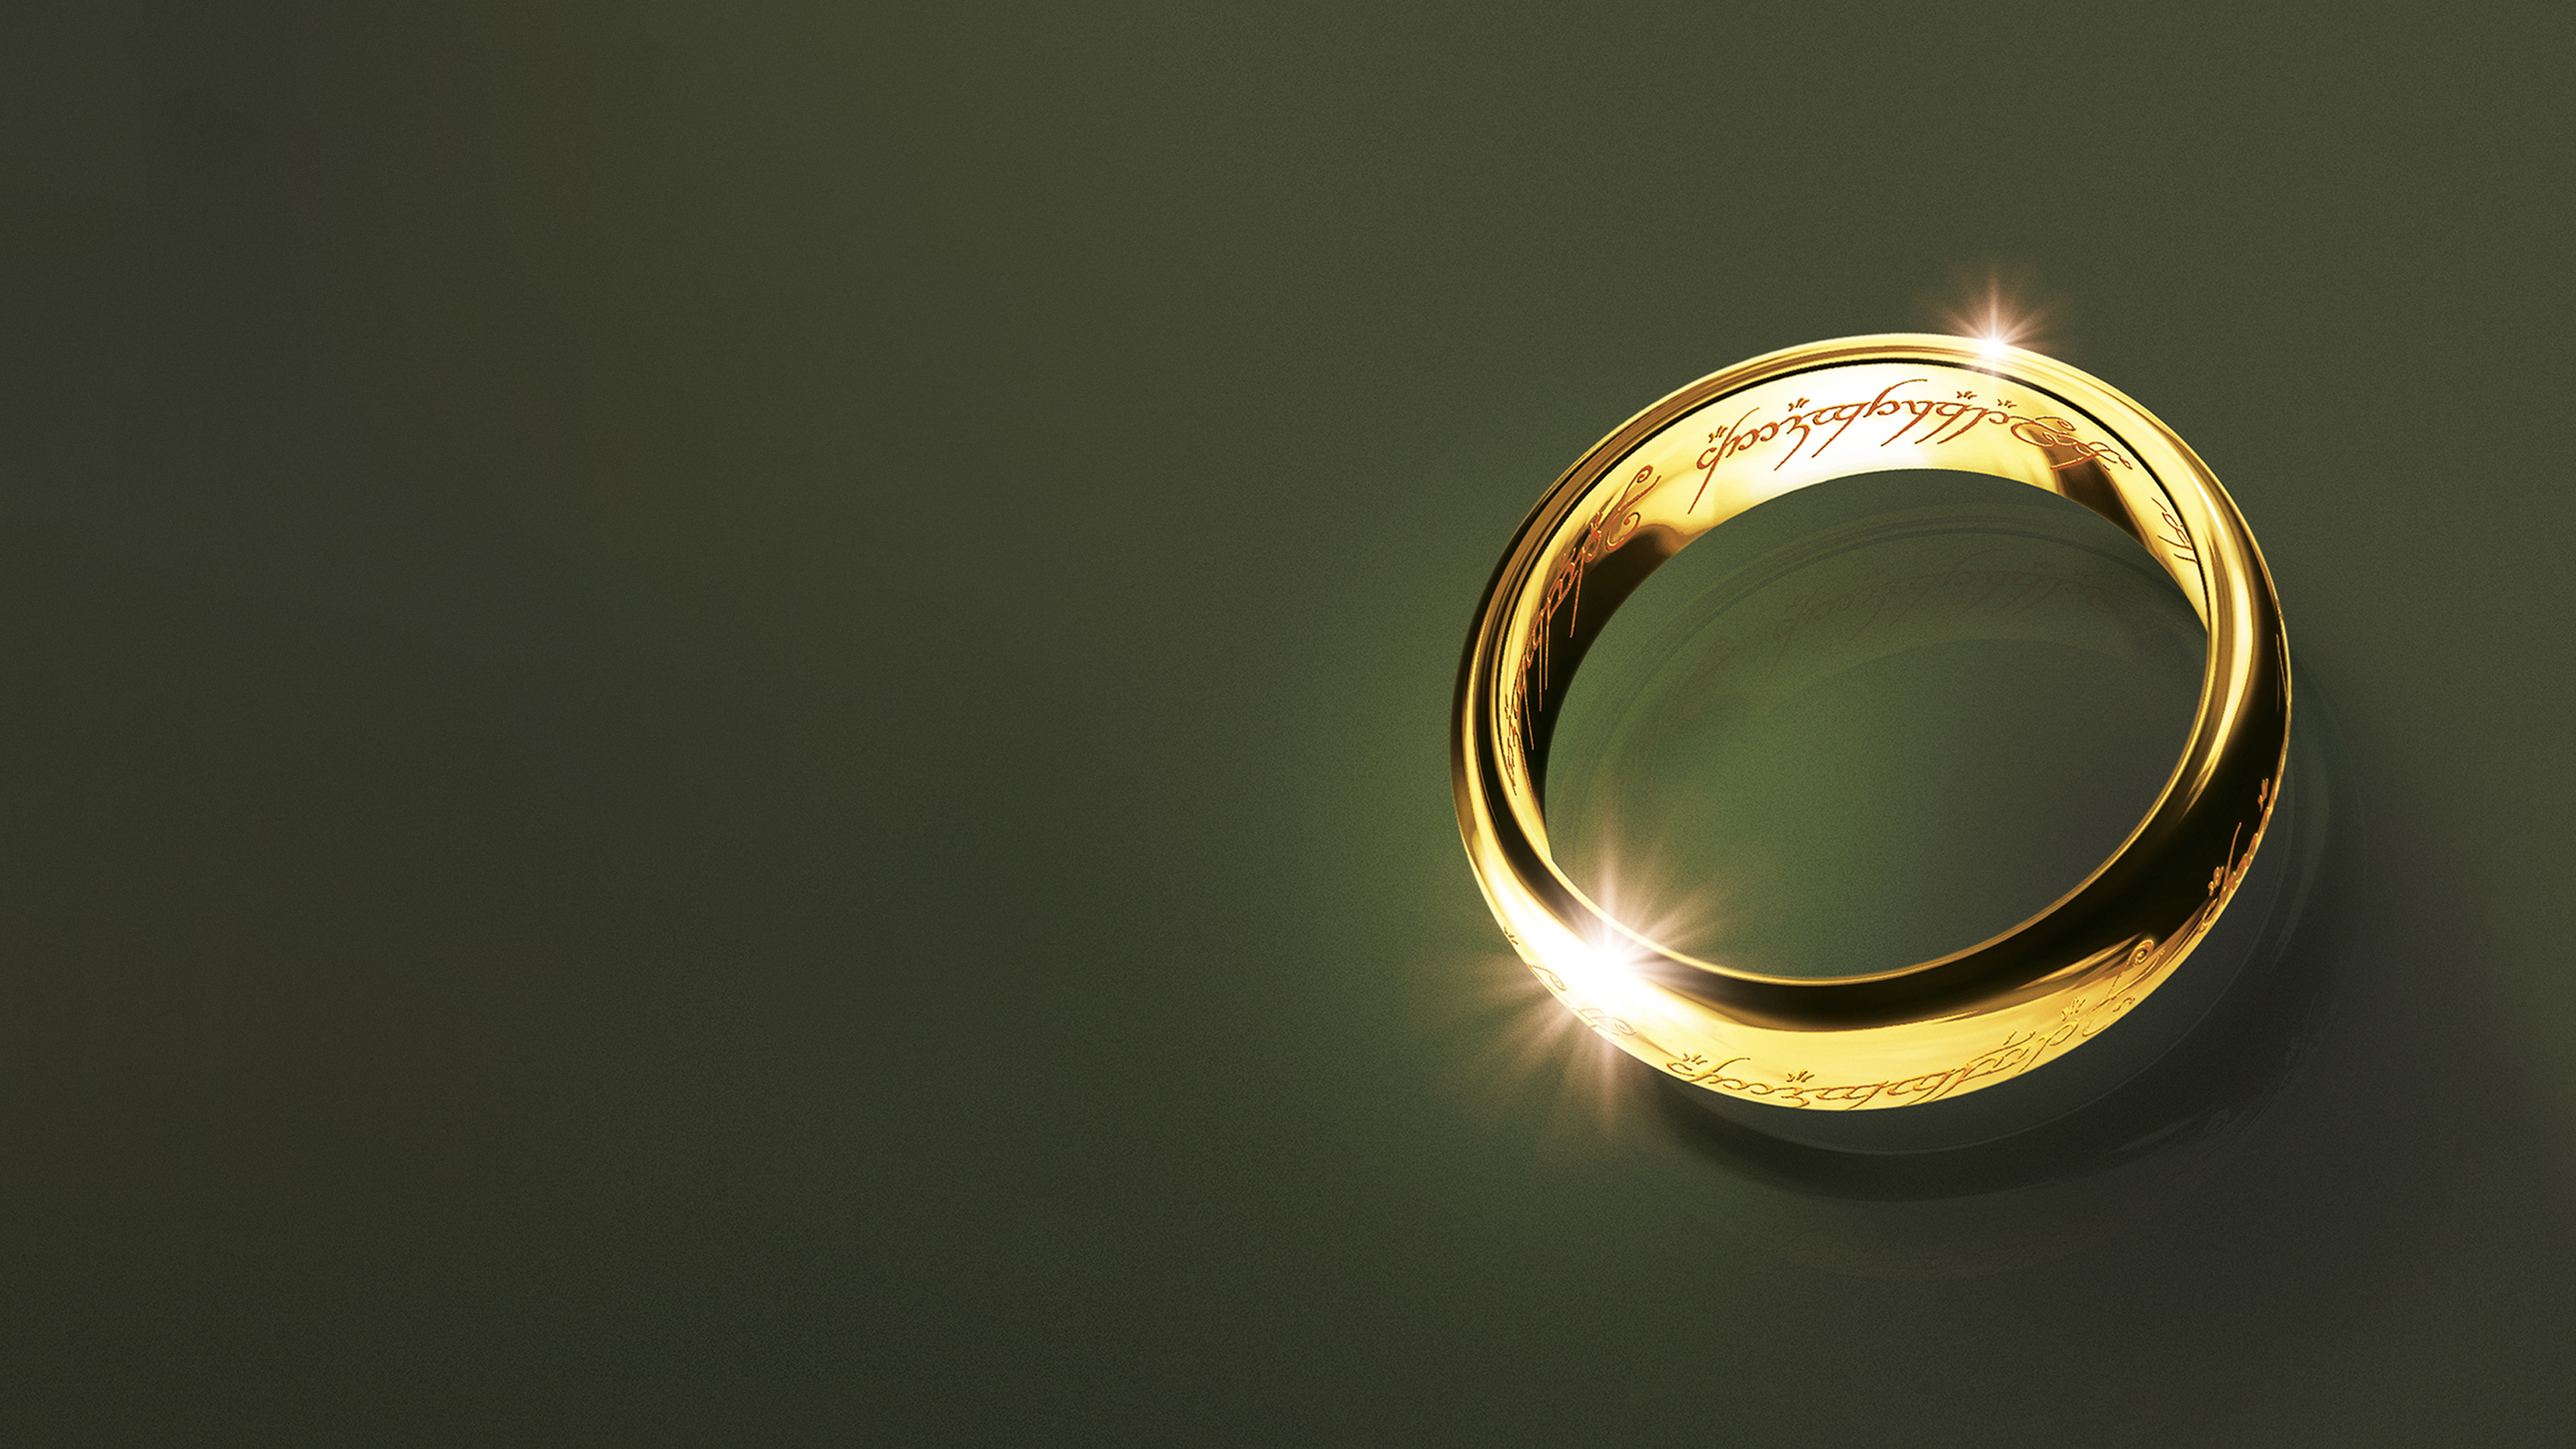 Ring Photos, Download The BEST Free Ring Stock Photos & HD Images